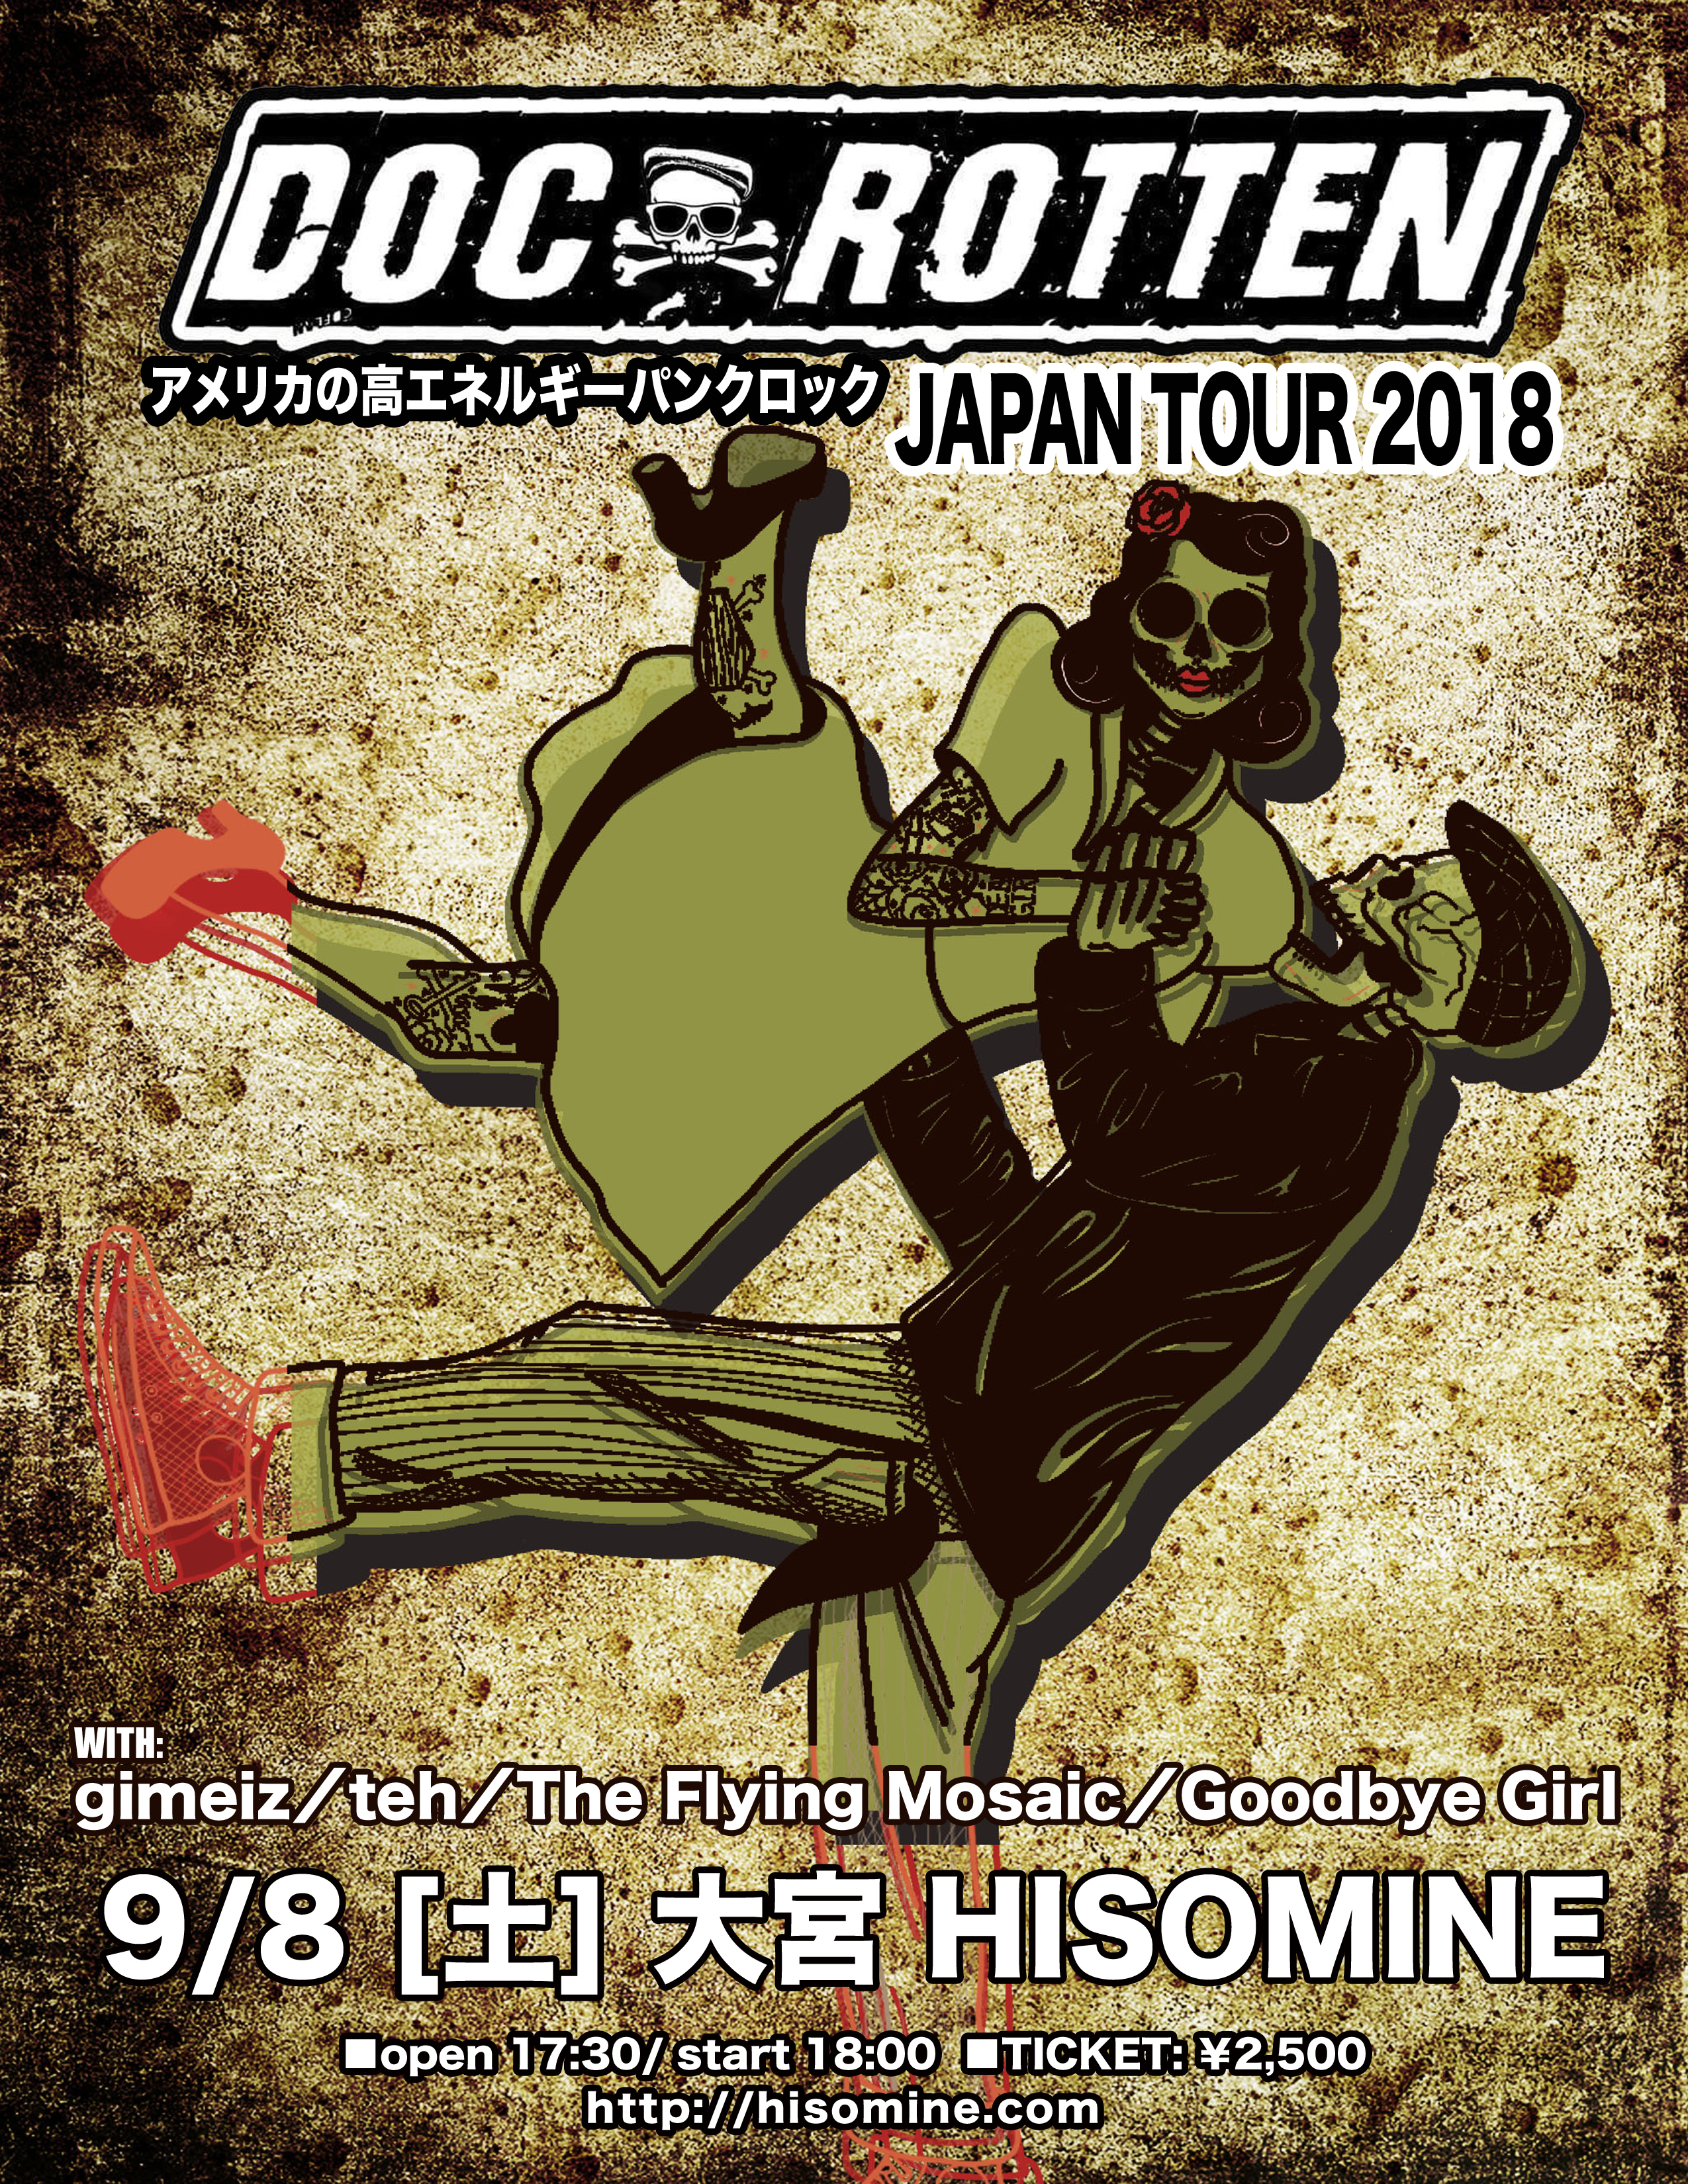 DOC ROTTEN Japan Tour in hisomine